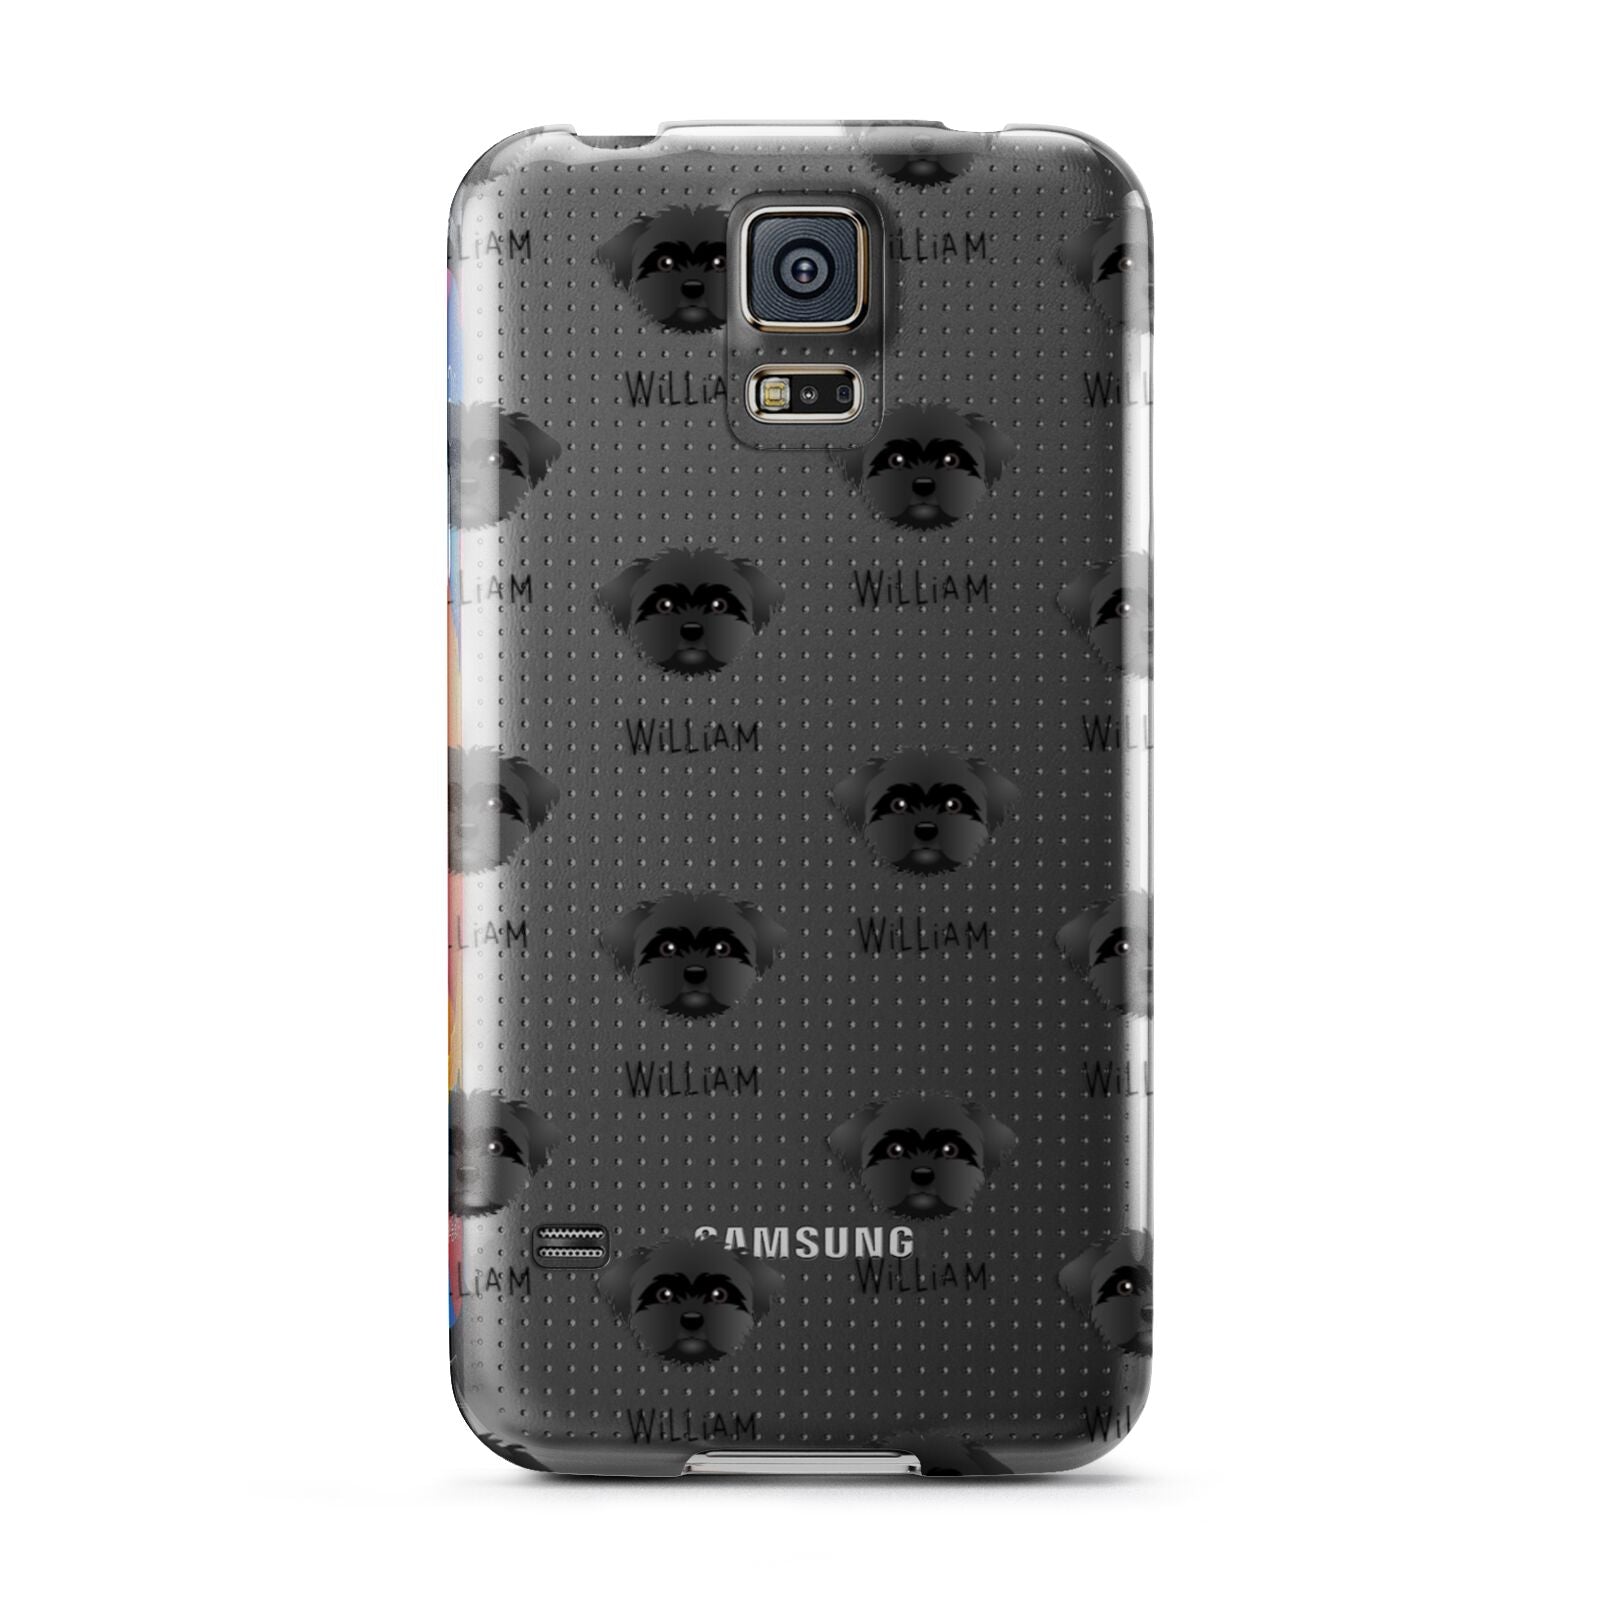 Peek a poo Icon with Name Samsung Galaxy S5 Case